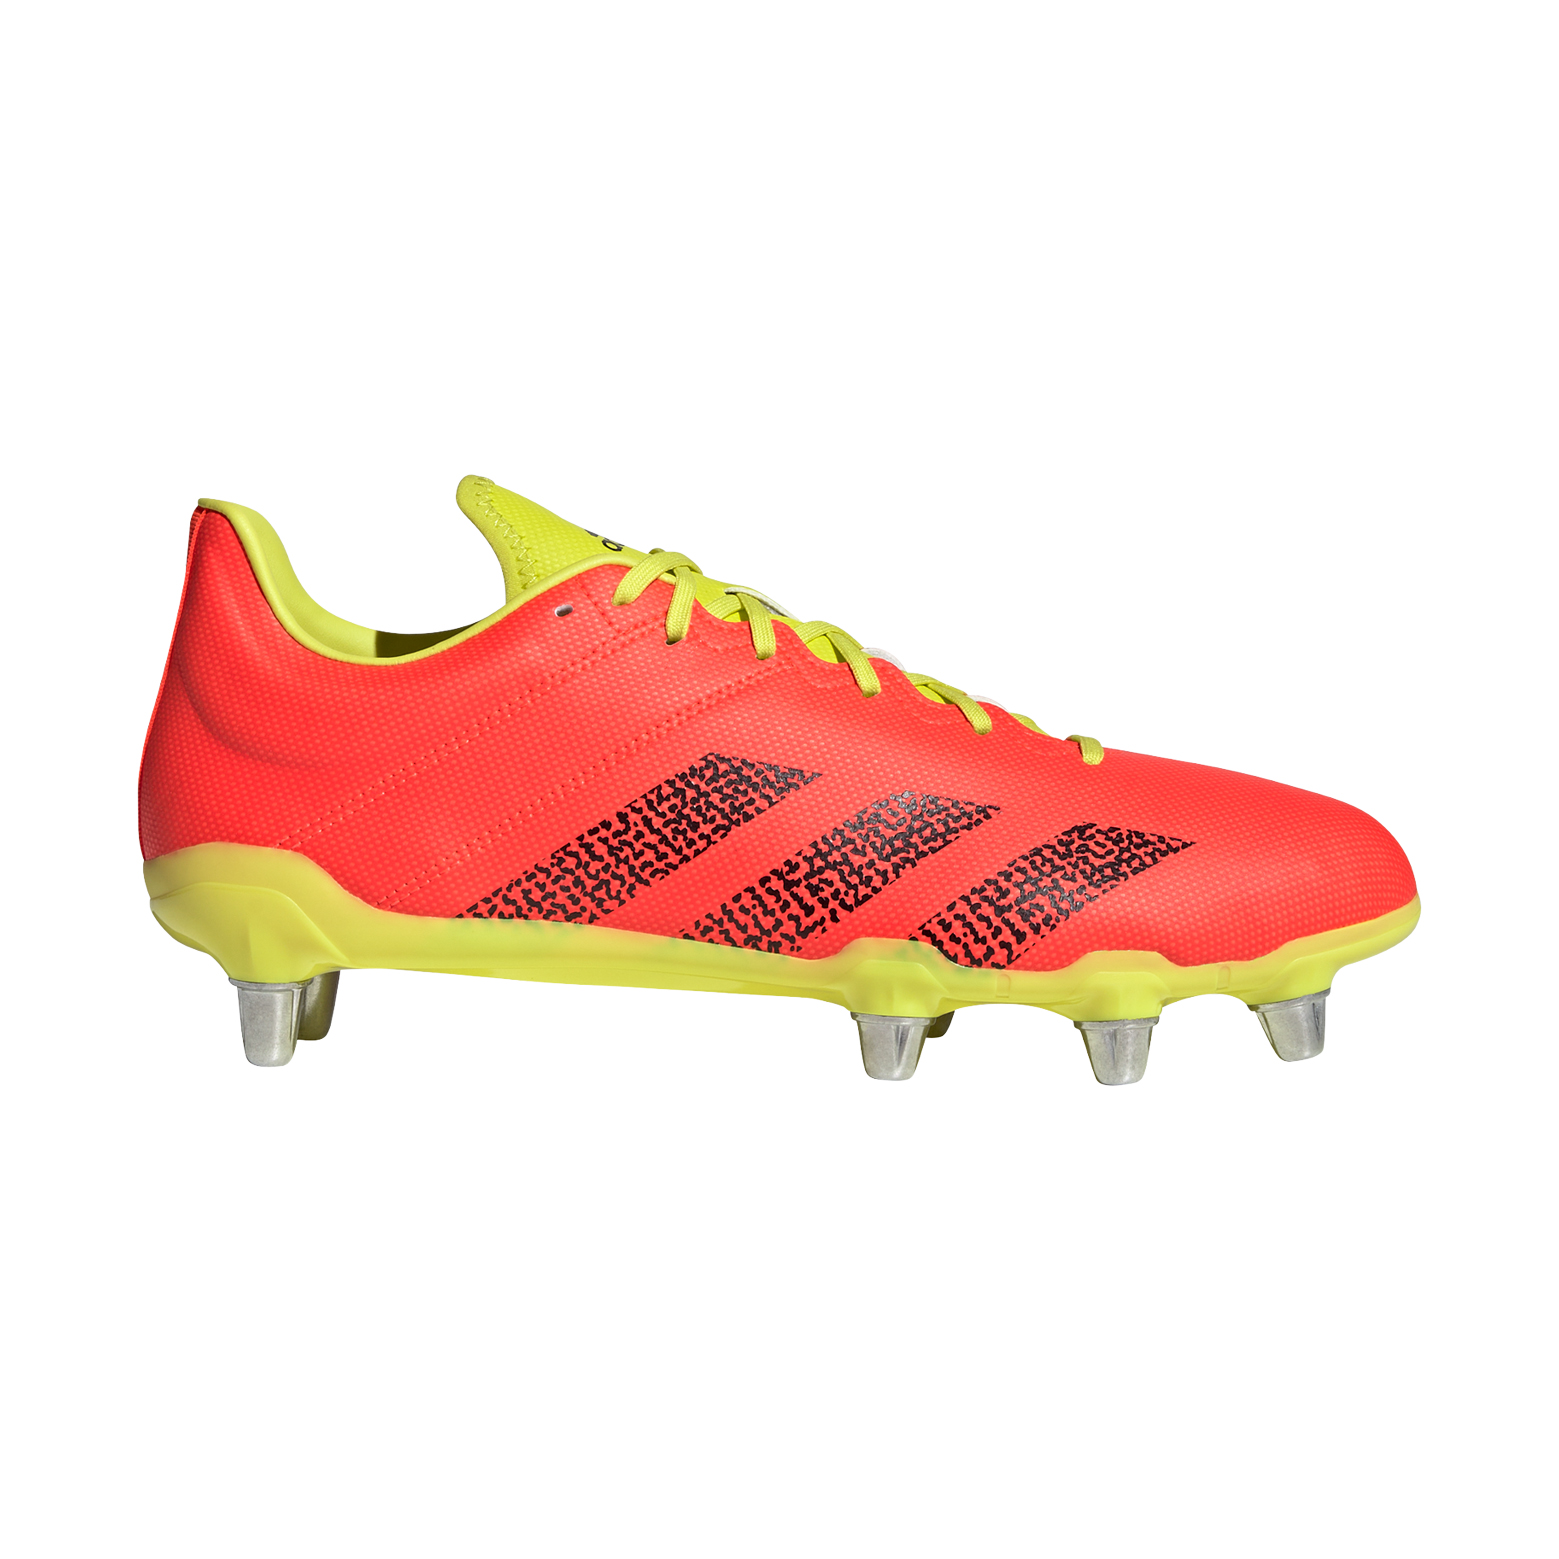 adidas Kakari Soft Ground Boots | Acid Yellow/Red | The Rugby Shop